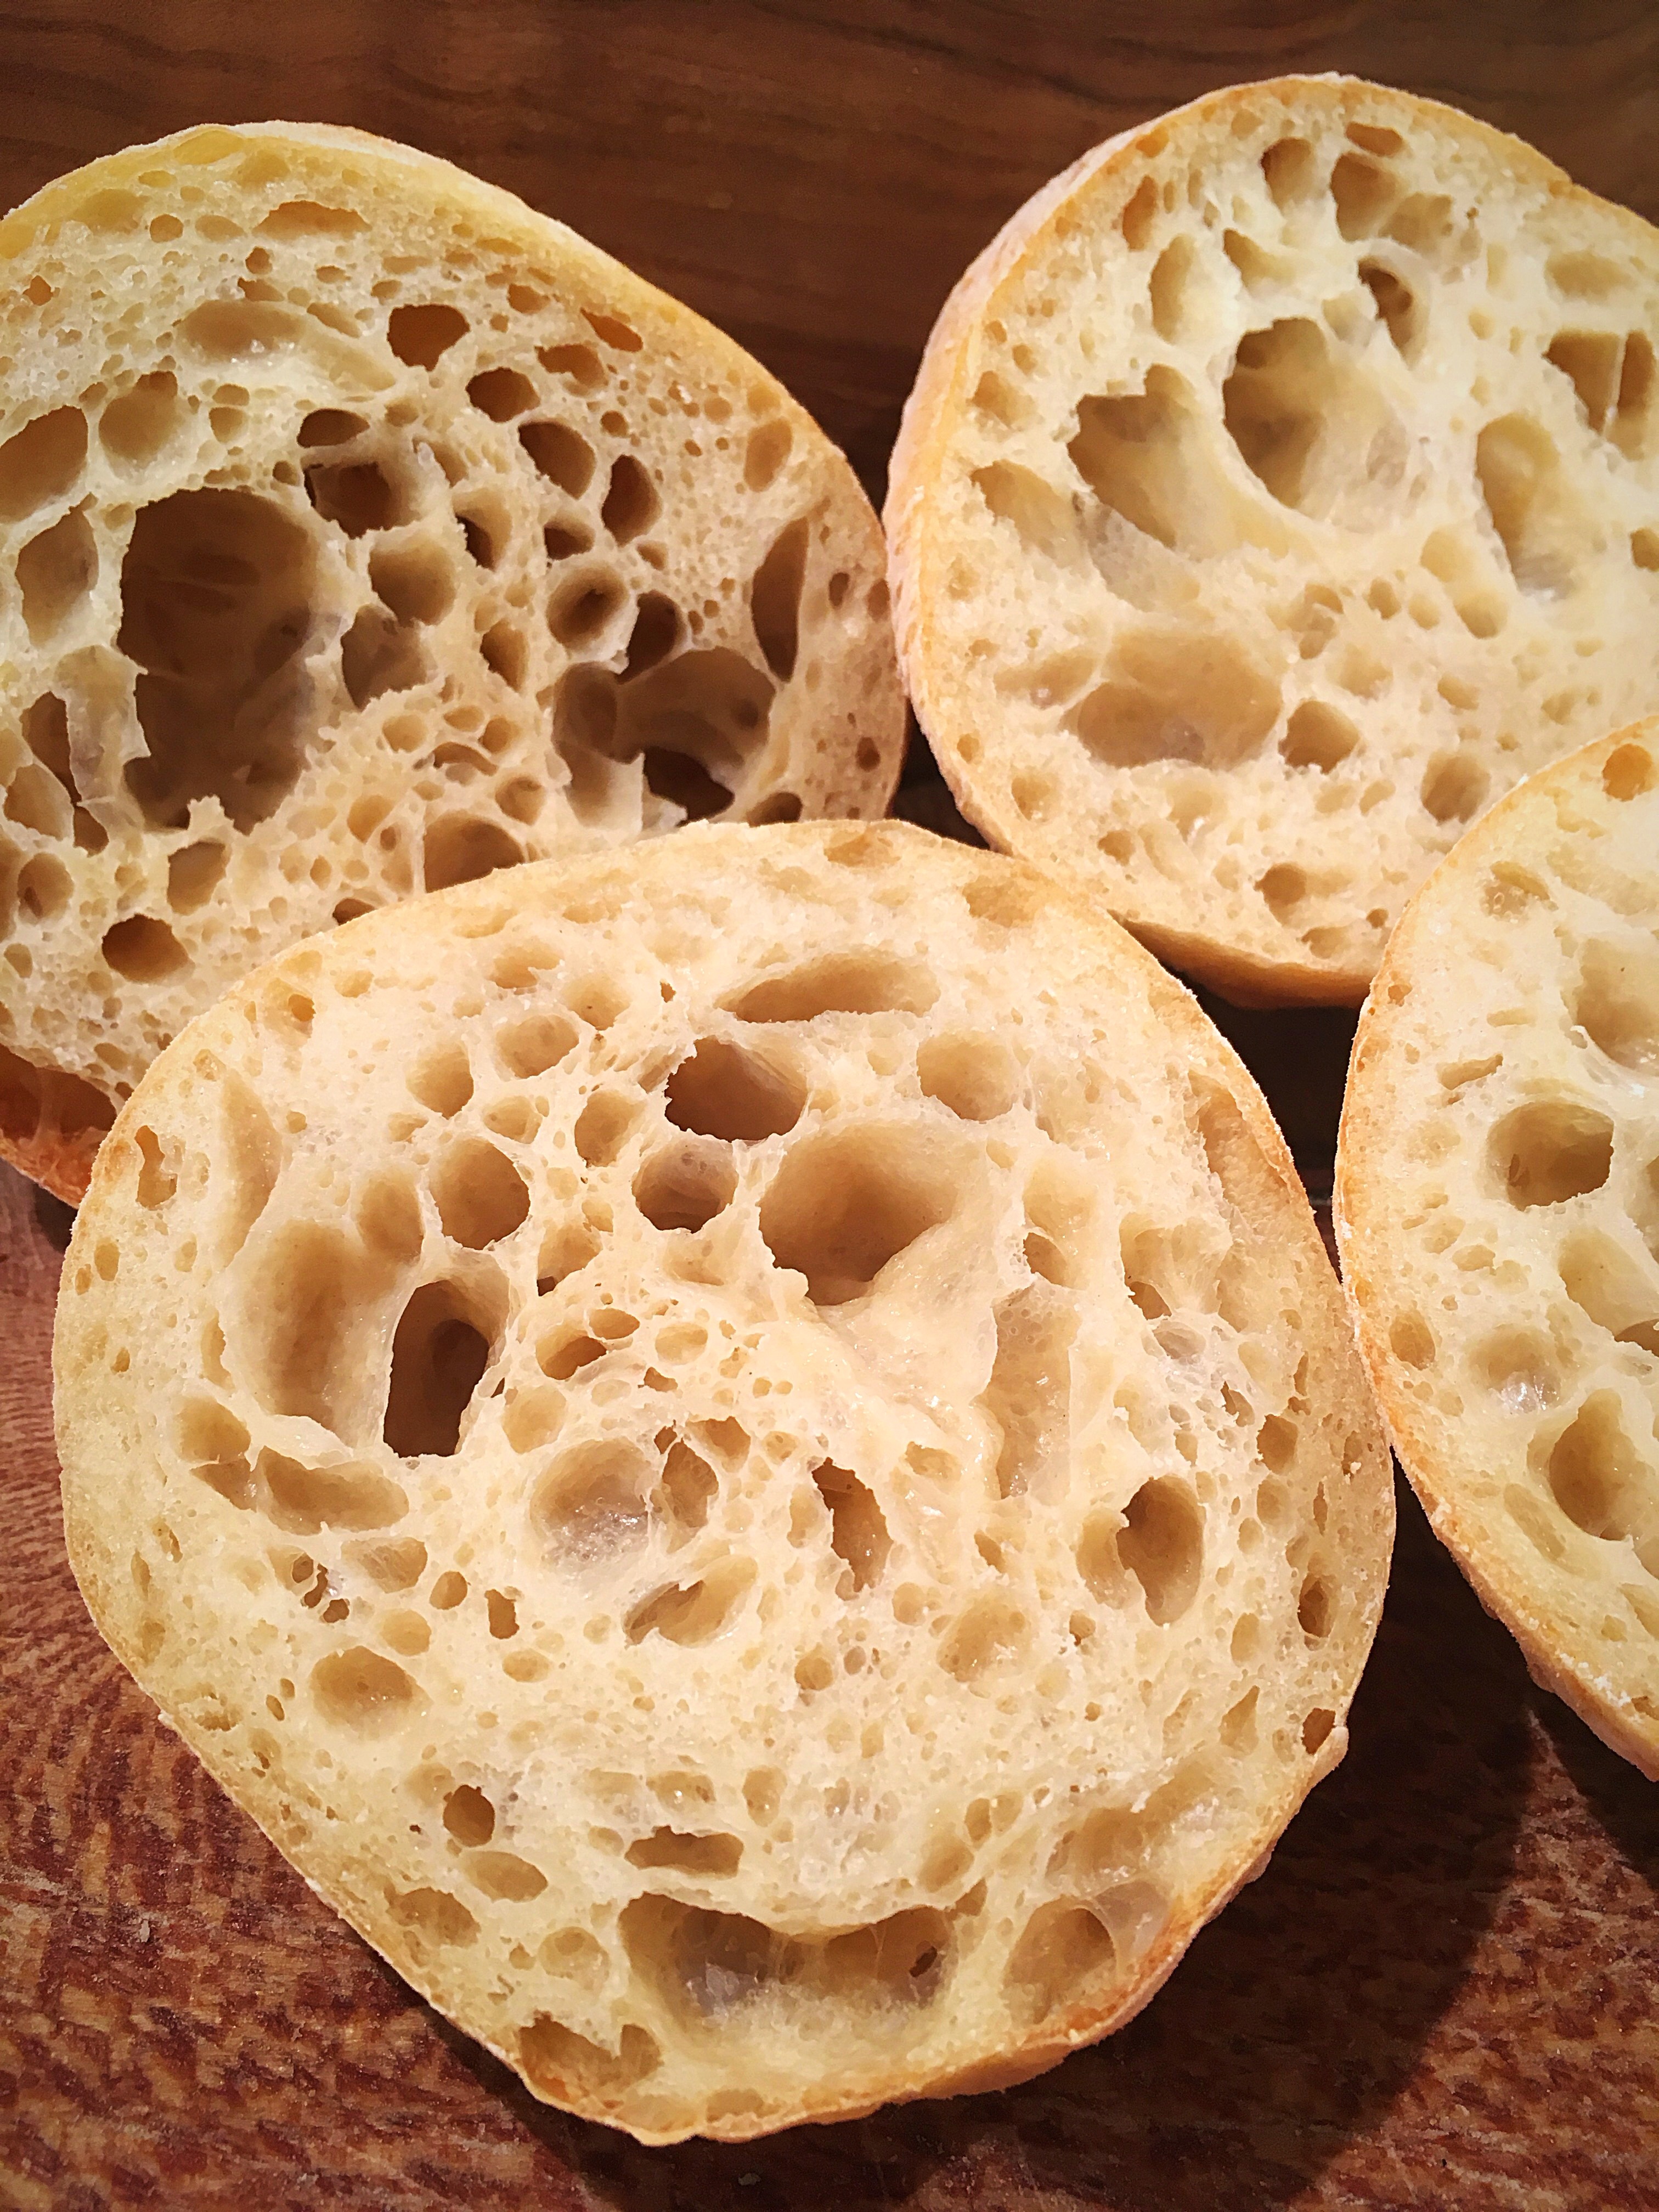 A close up of some bread on the table